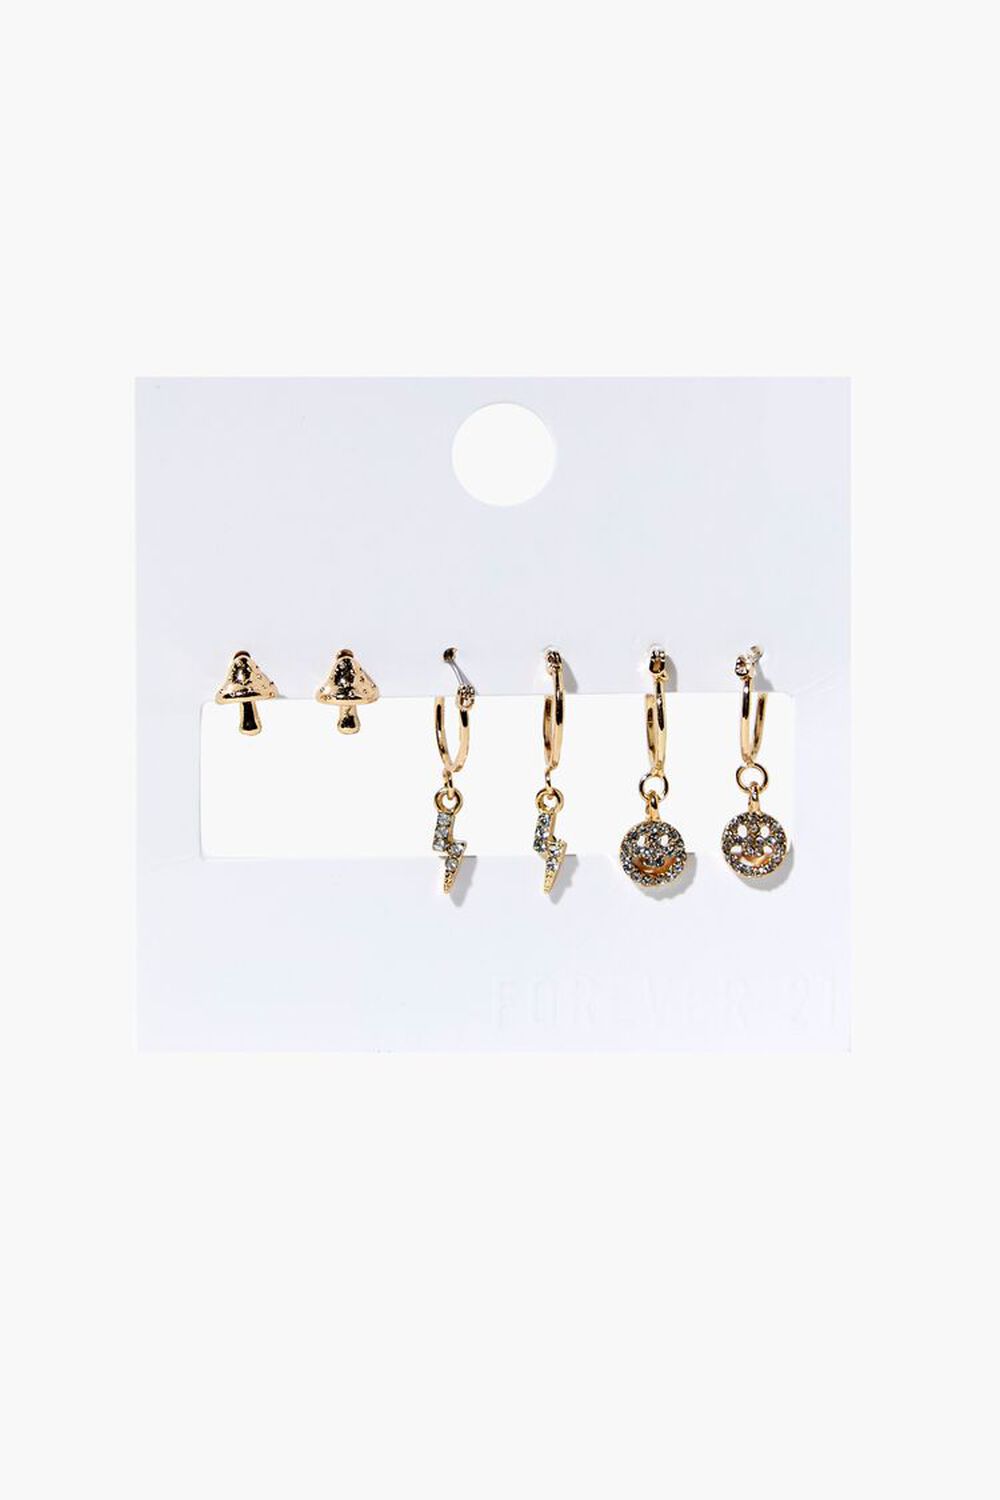 CLEAR/GOLD Happy Face Charm Earring Set, image 1